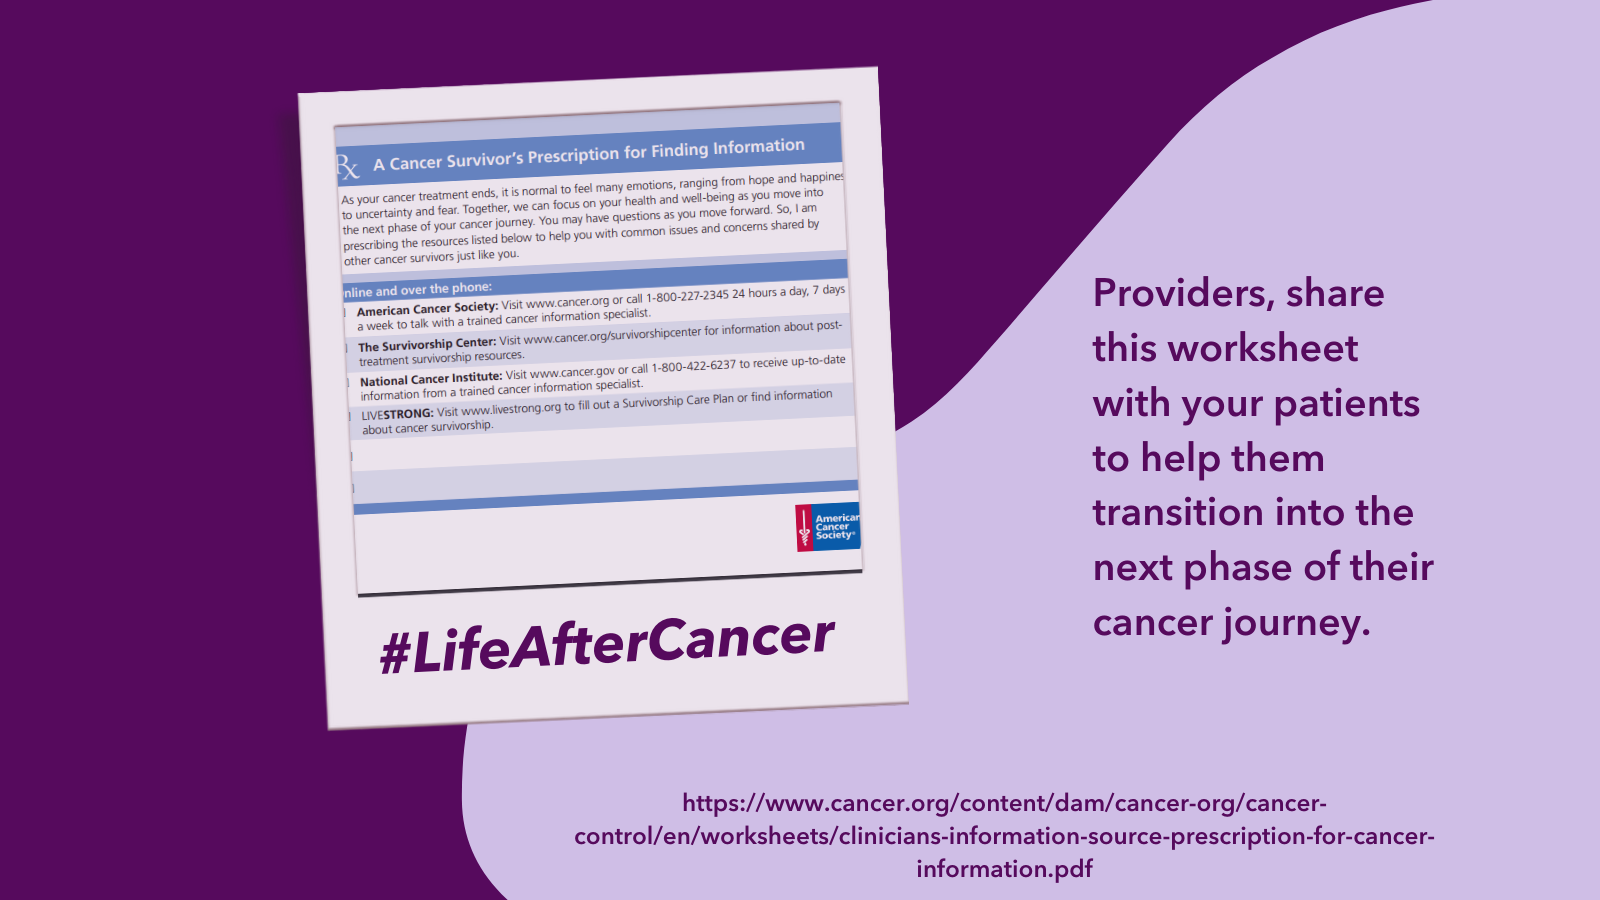 Image of American Cancer Society worksheet with hashtag #LifeAfterCancer. Adjacent text reads: Providers, share this worksheet with your patients to help them transition into the next phase of their cancer journey. 